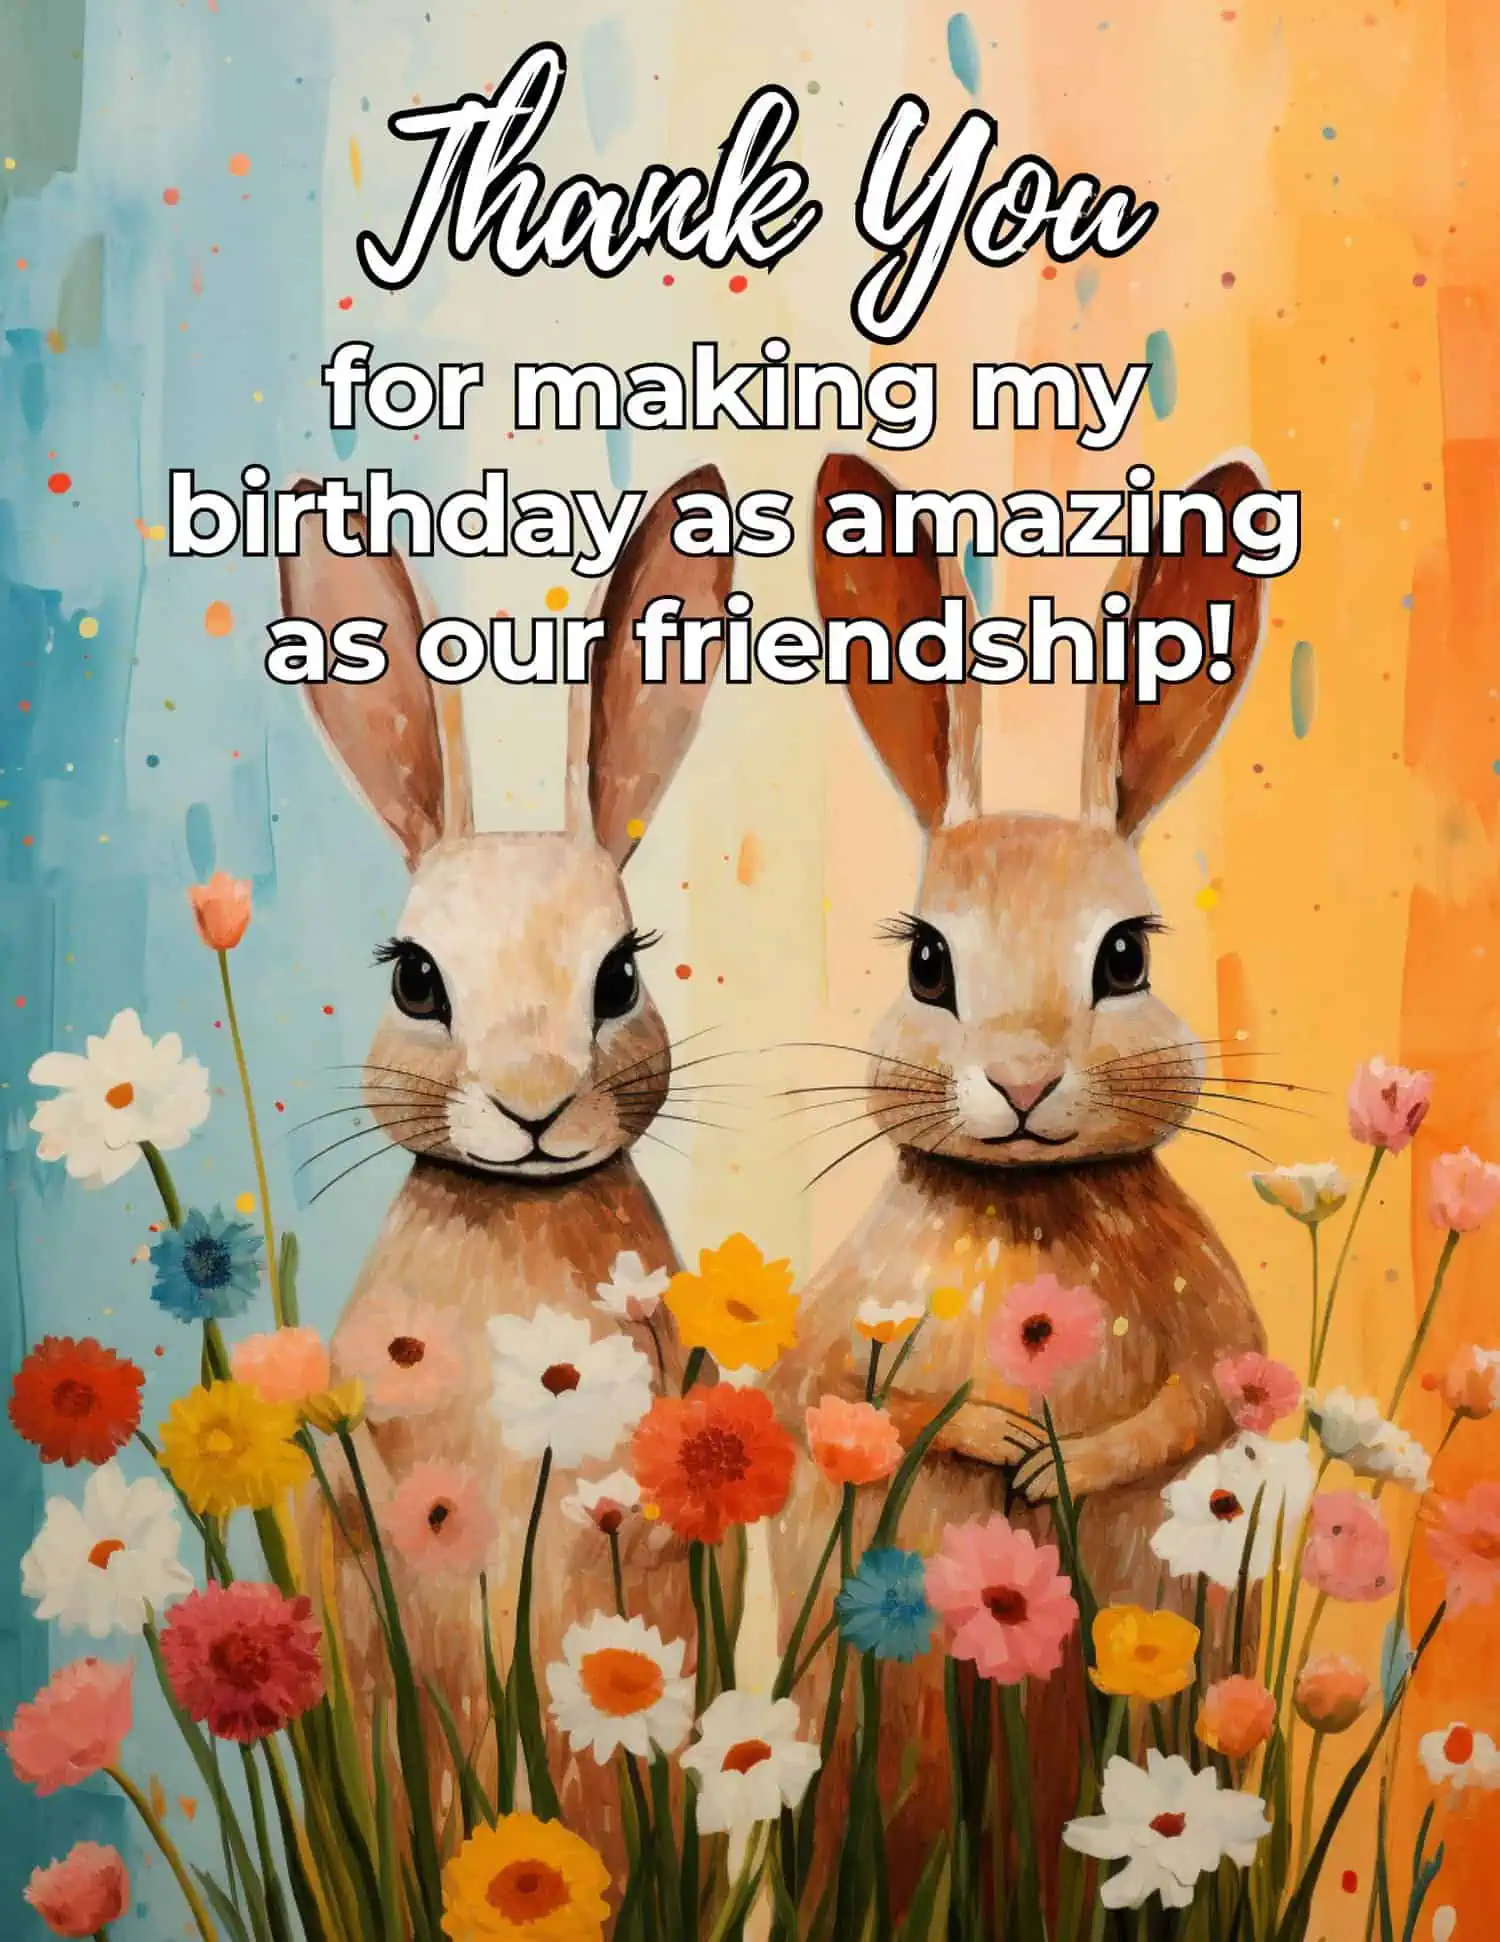 Discover heartfelt and meaningful messages to thank your best friend for their birthday wishes.